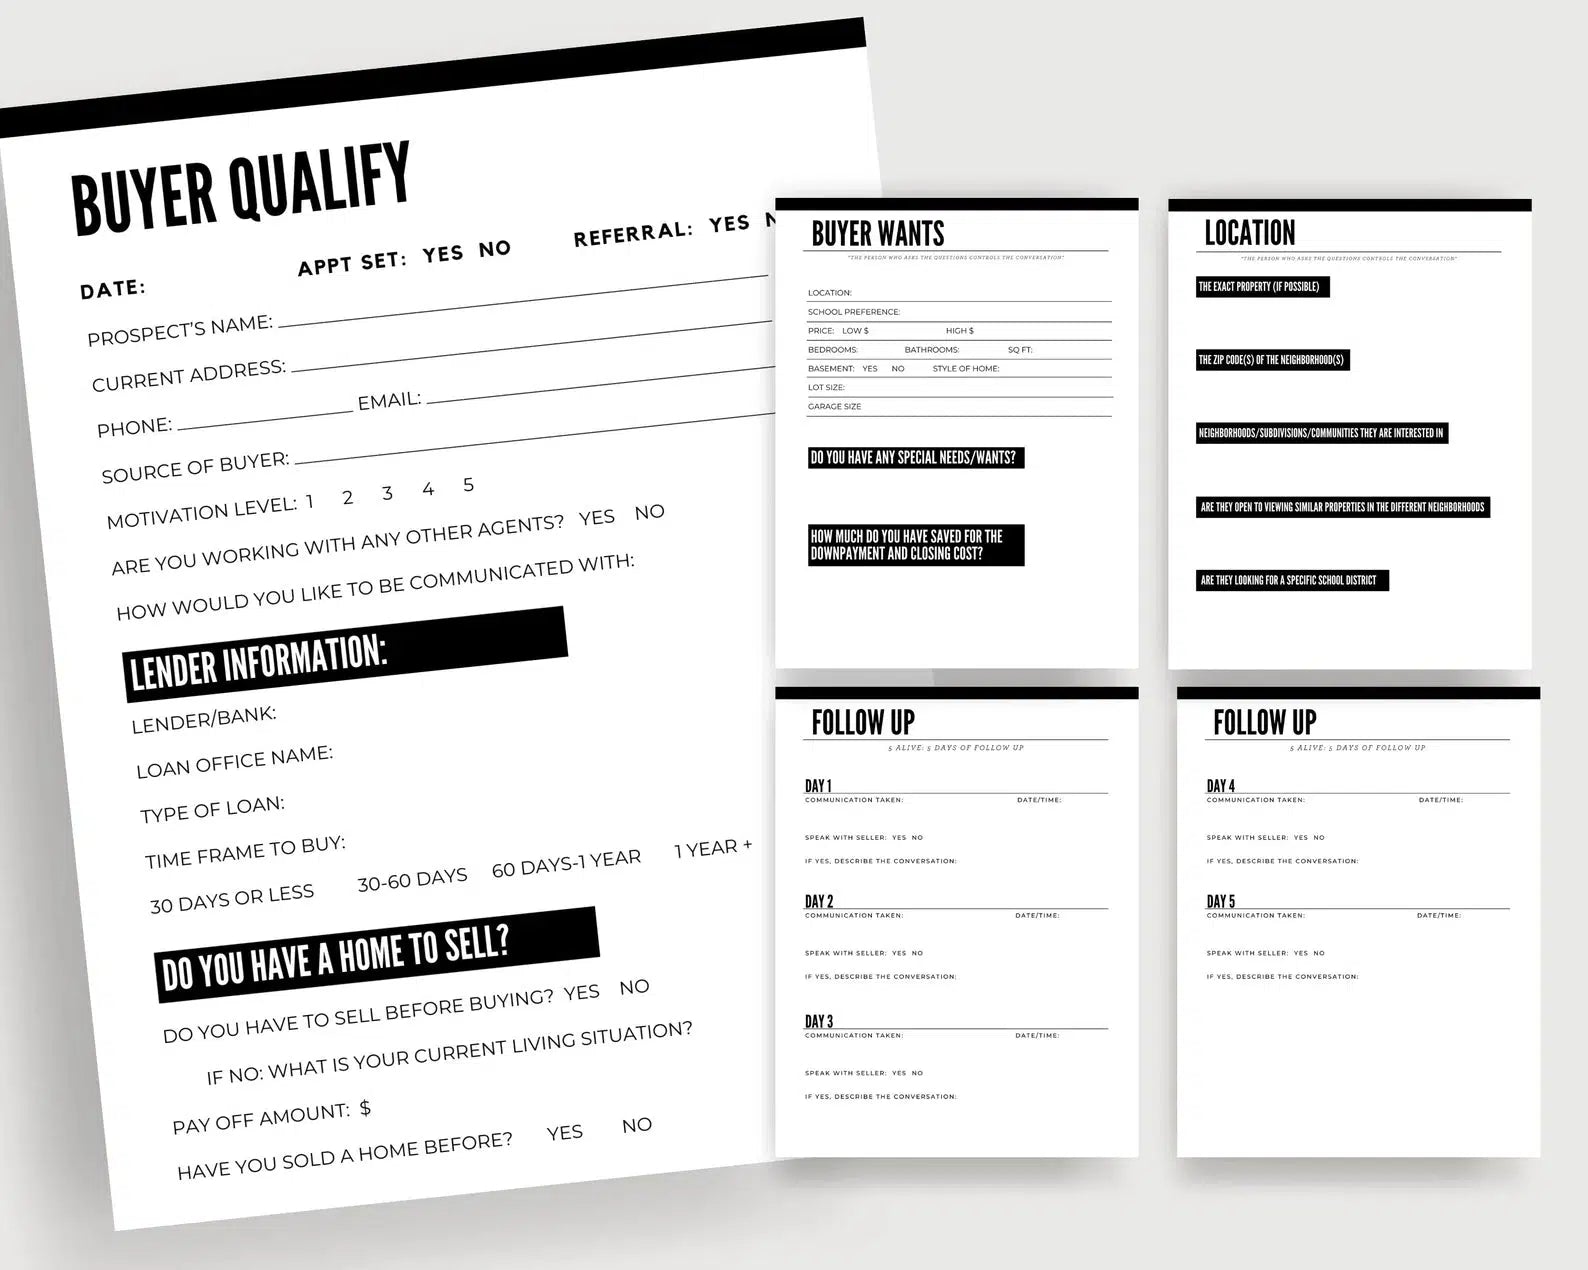 Real Estate Template for Buyer and Seller Questionnaire Real Estate Form Template for Sellers Real Estate Form Template for Buyers Real Estate Questionnaire Template Real Estate Follow-up Form Template